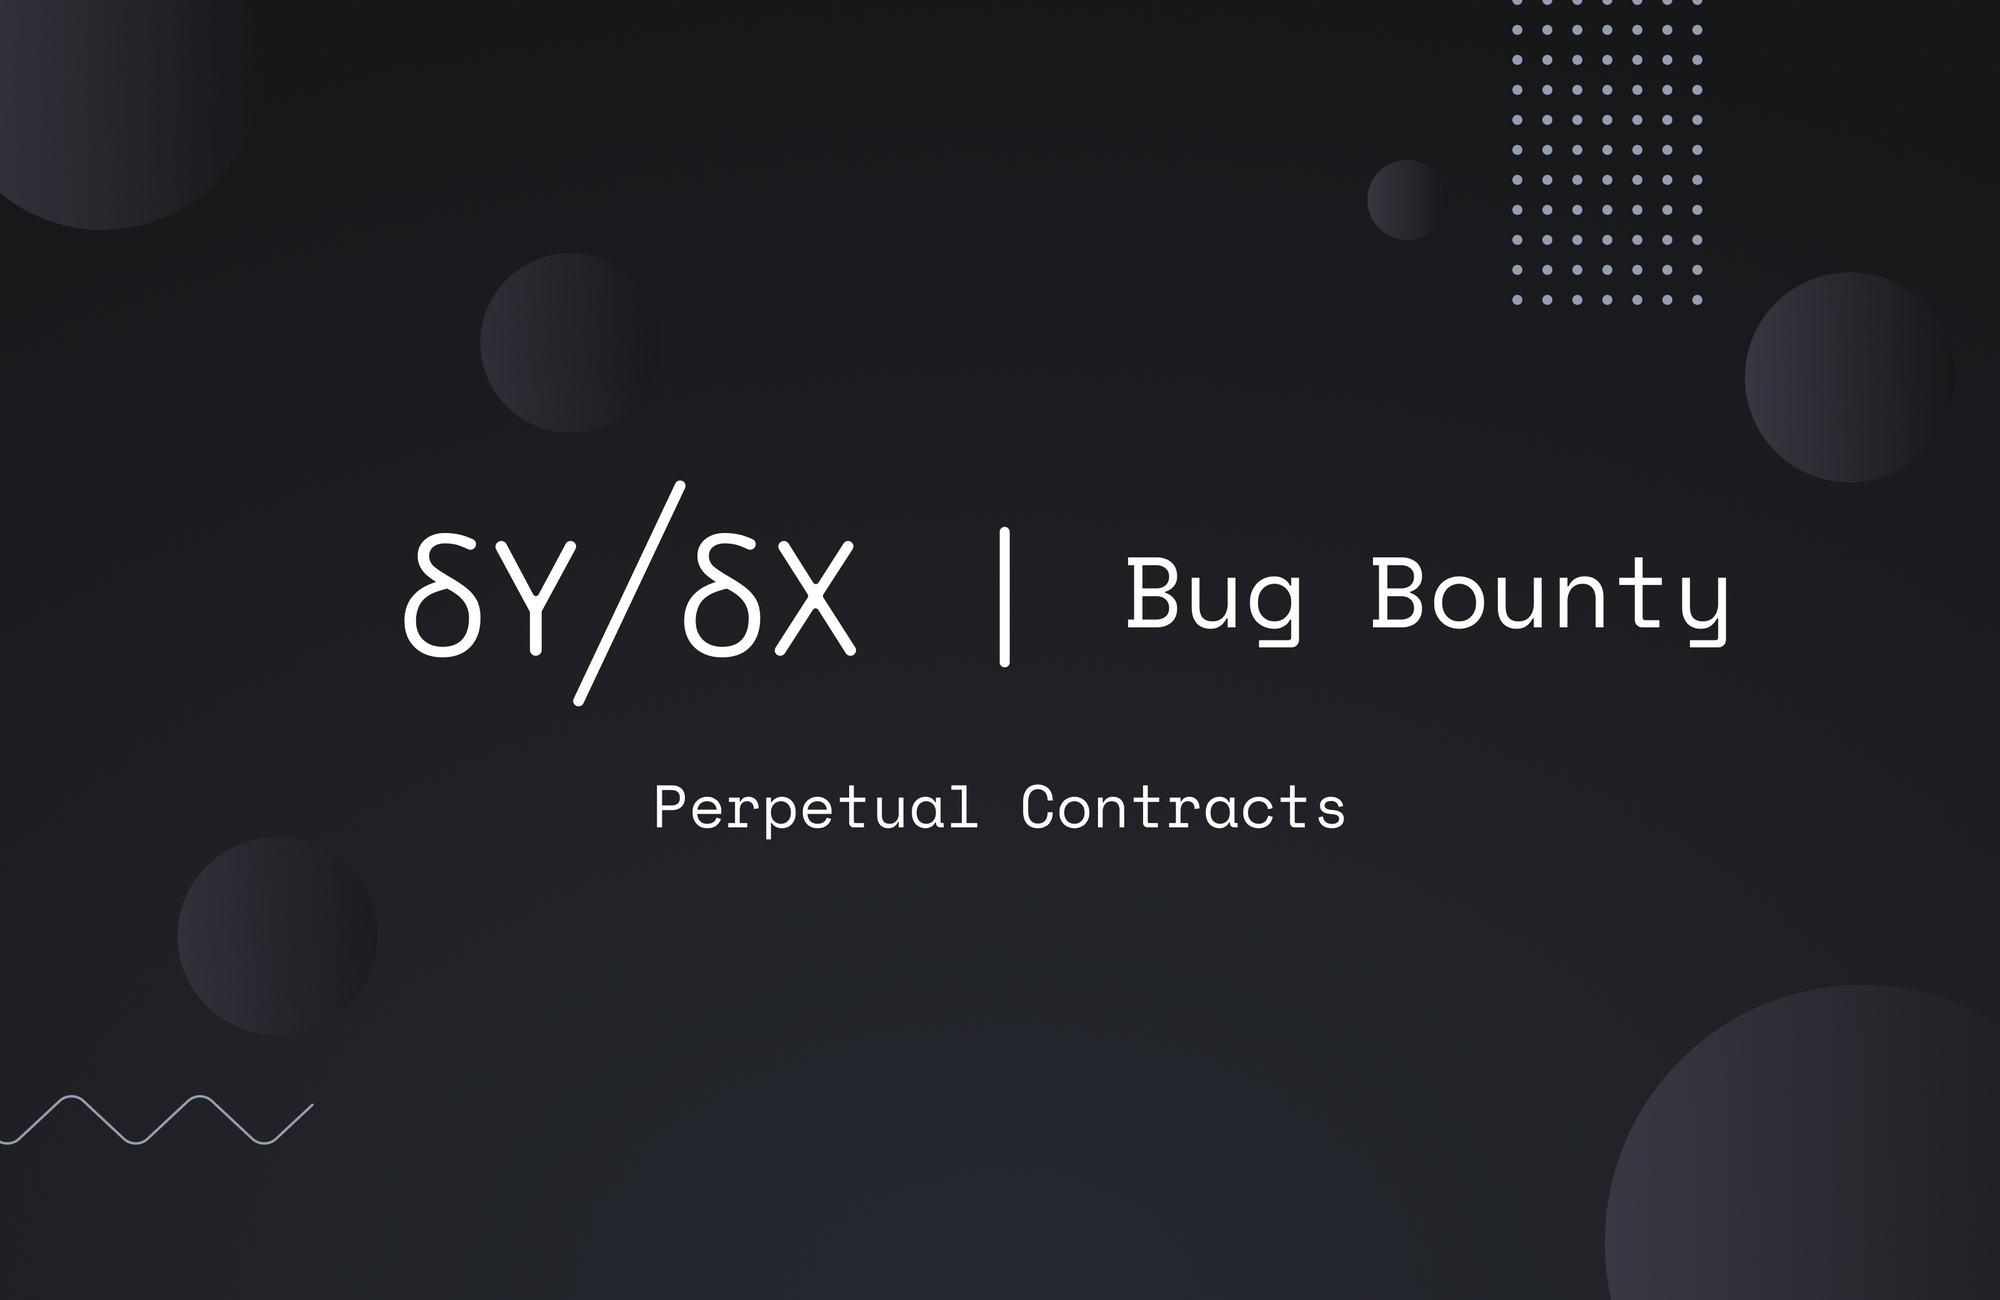 Announcing the dYdX Perpetual Contracts Bug Bounty